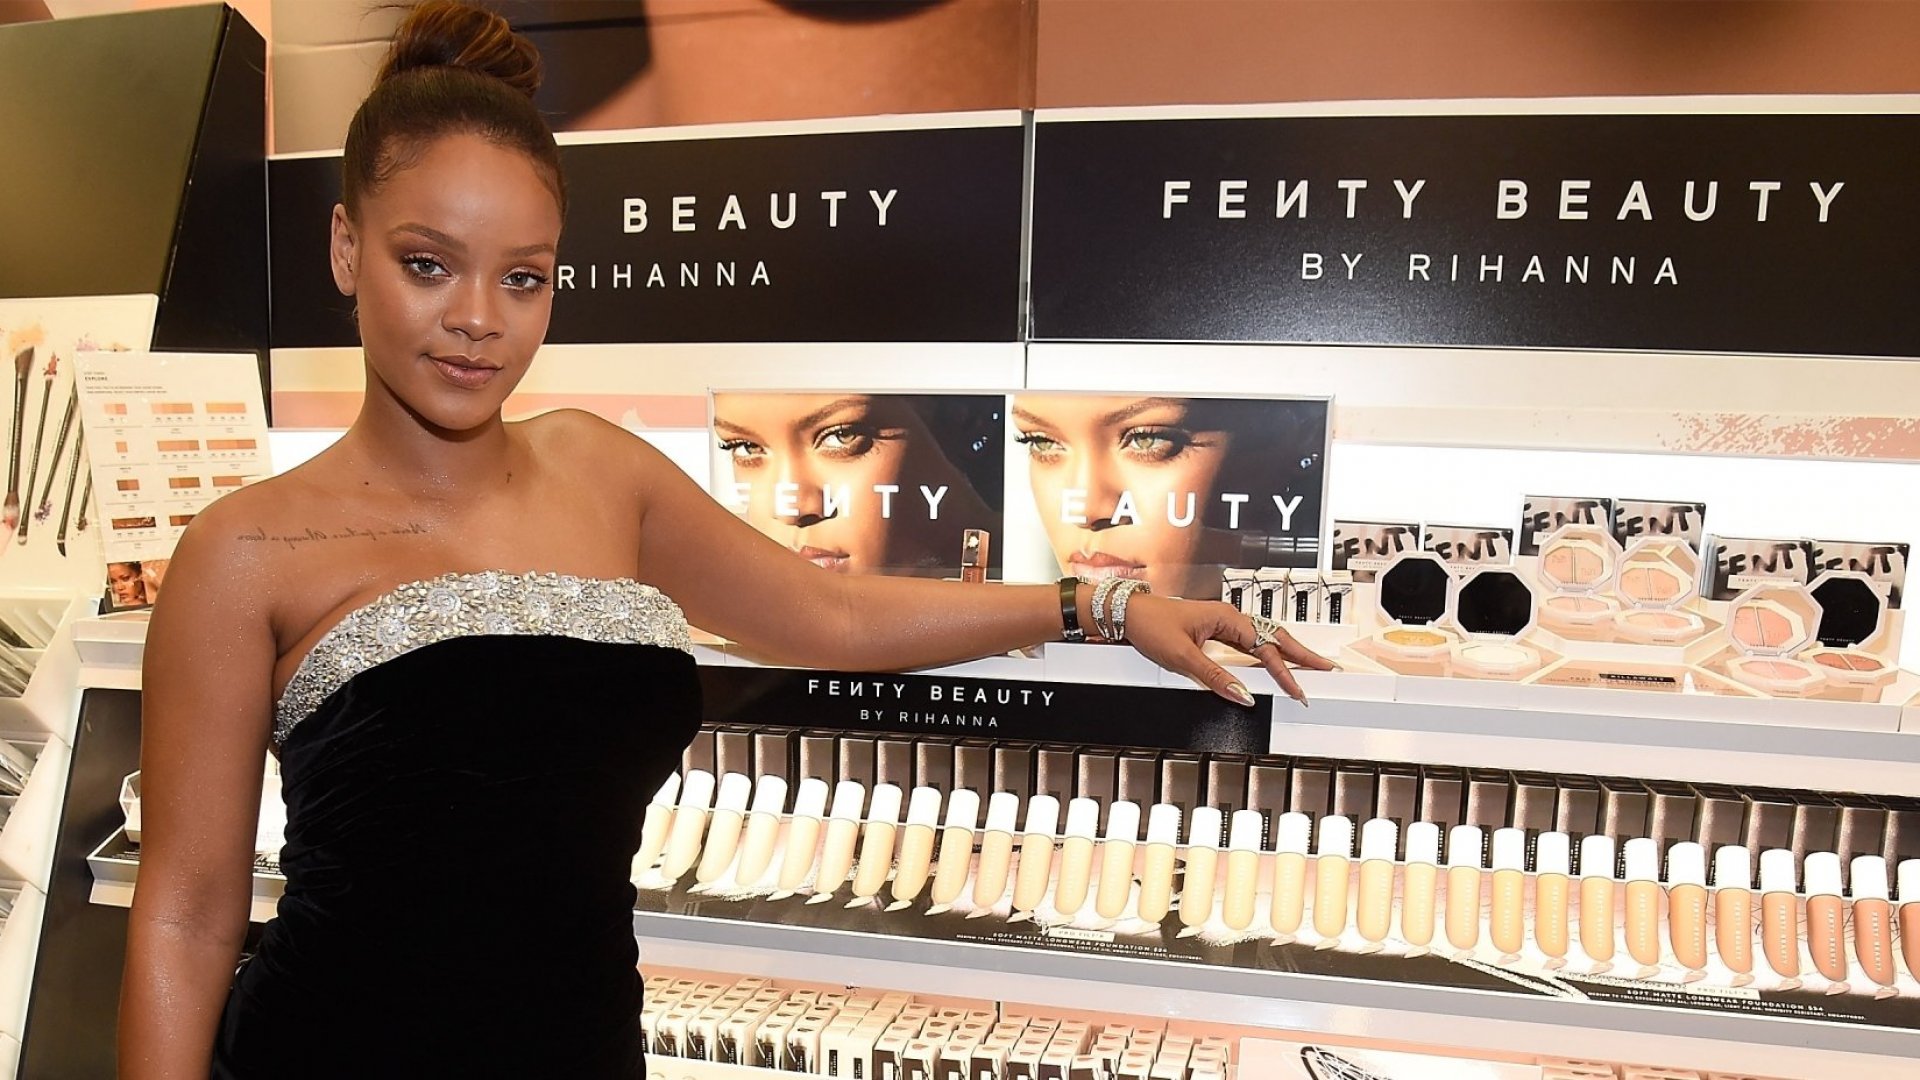 How Rihanna Become Famous: All You Need To Know